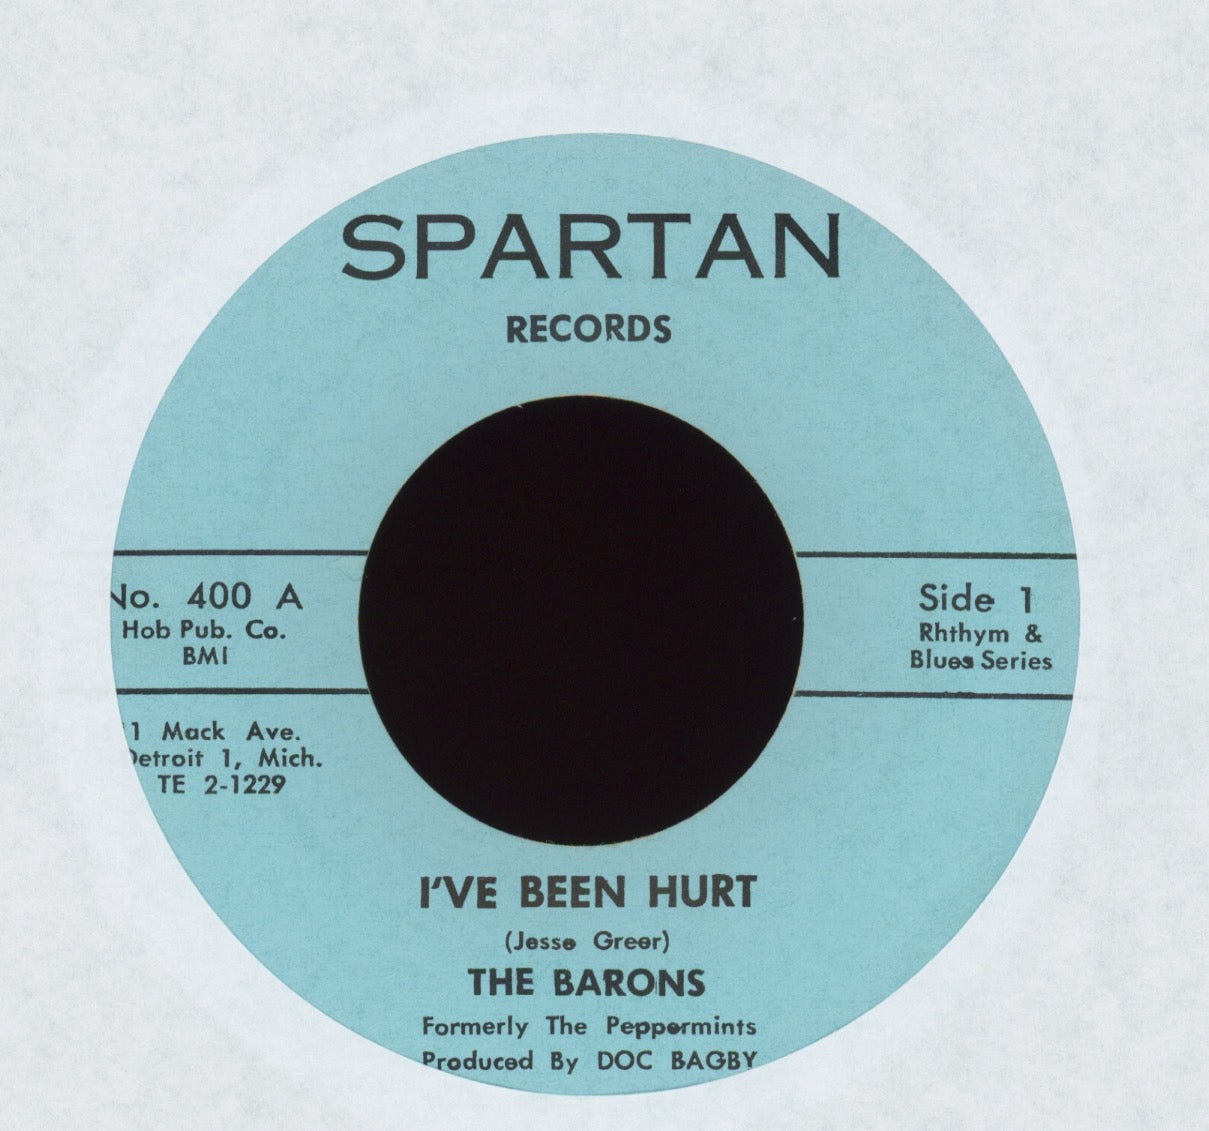 The Barons - I've Been Hurt on Spartan